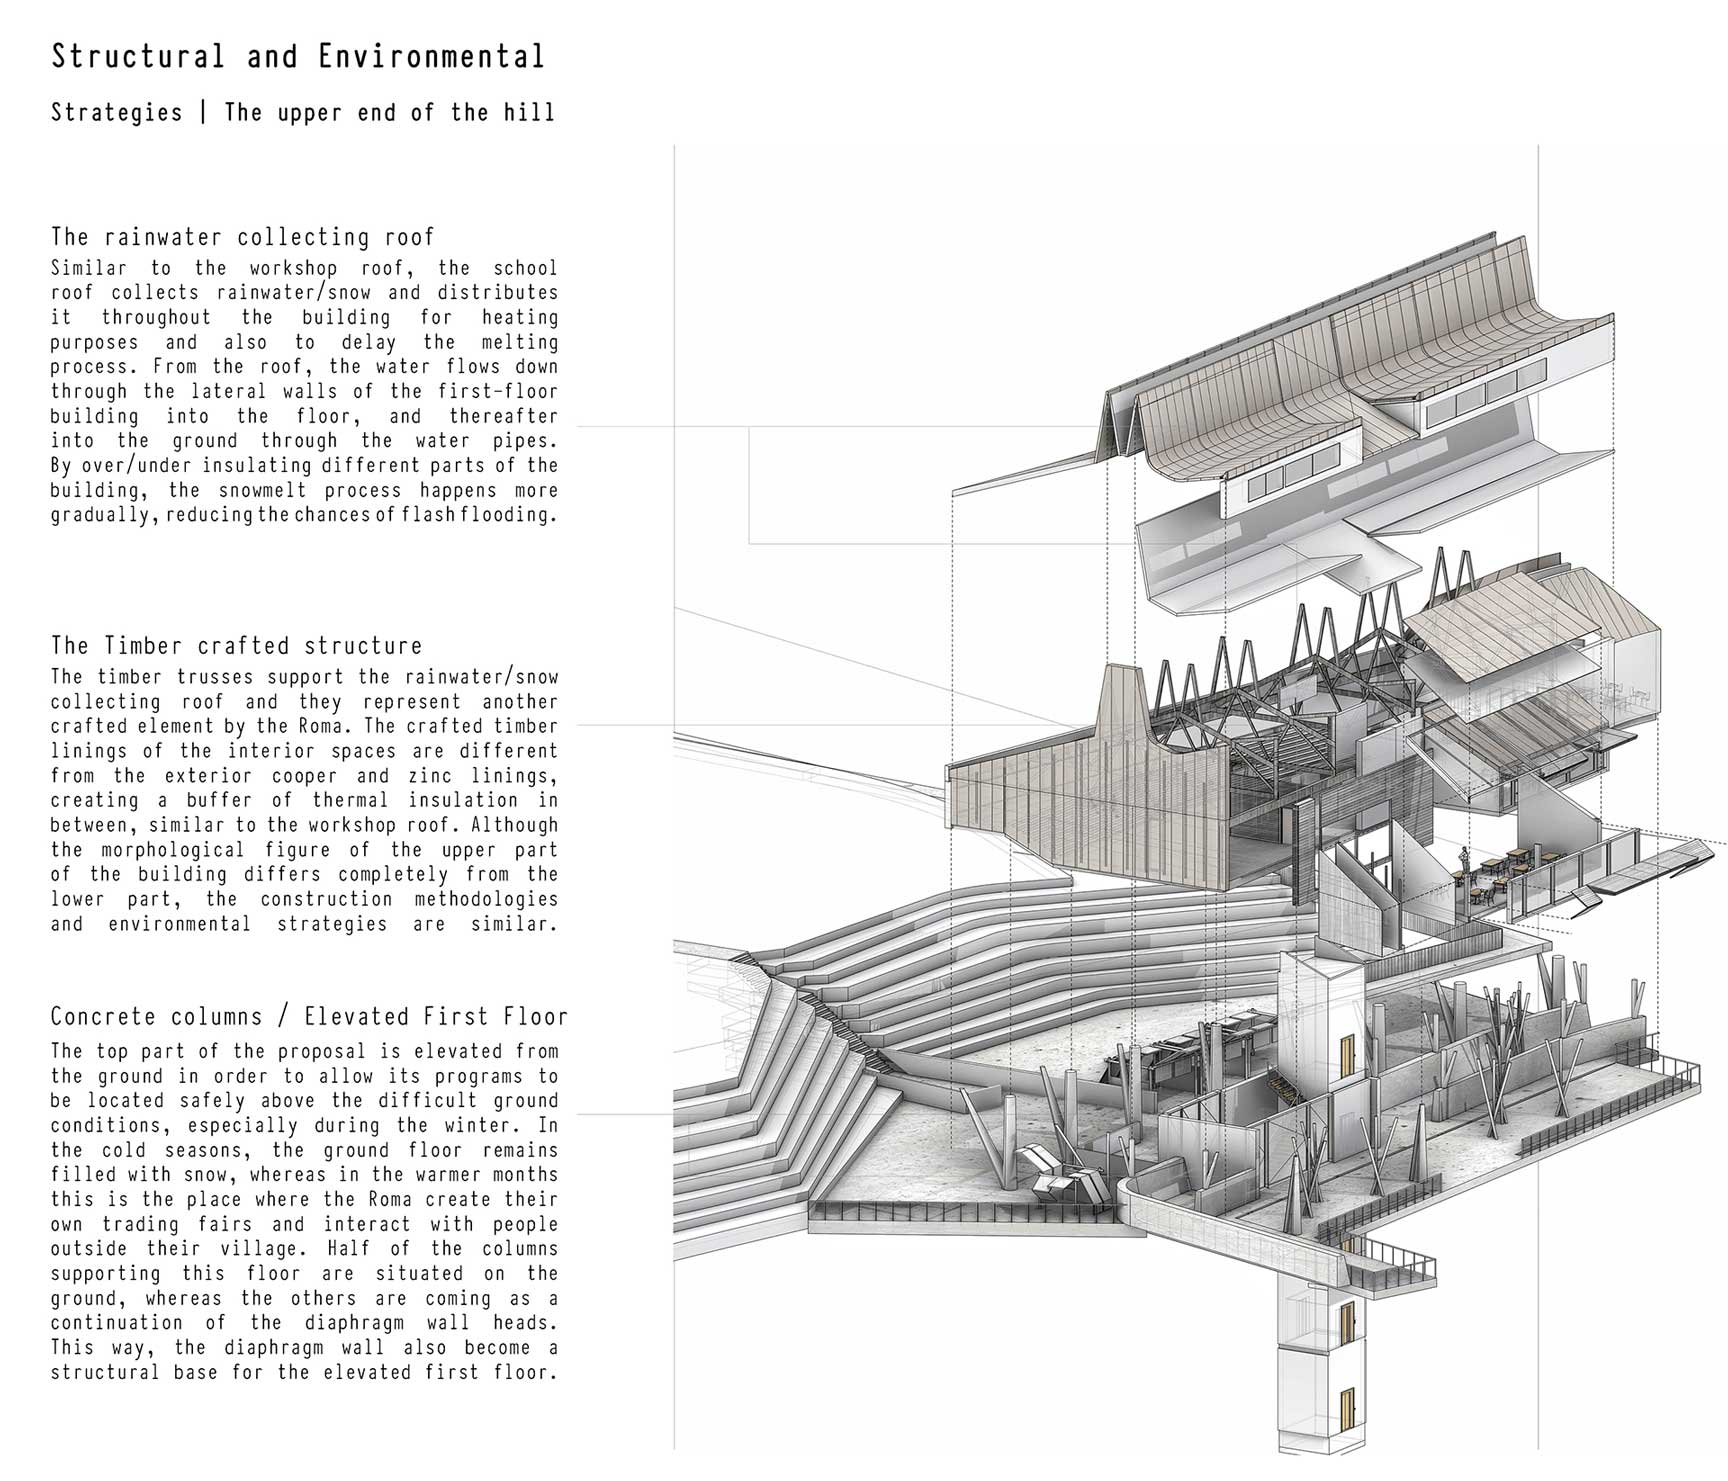 Environmental and Structural Strategies - The School